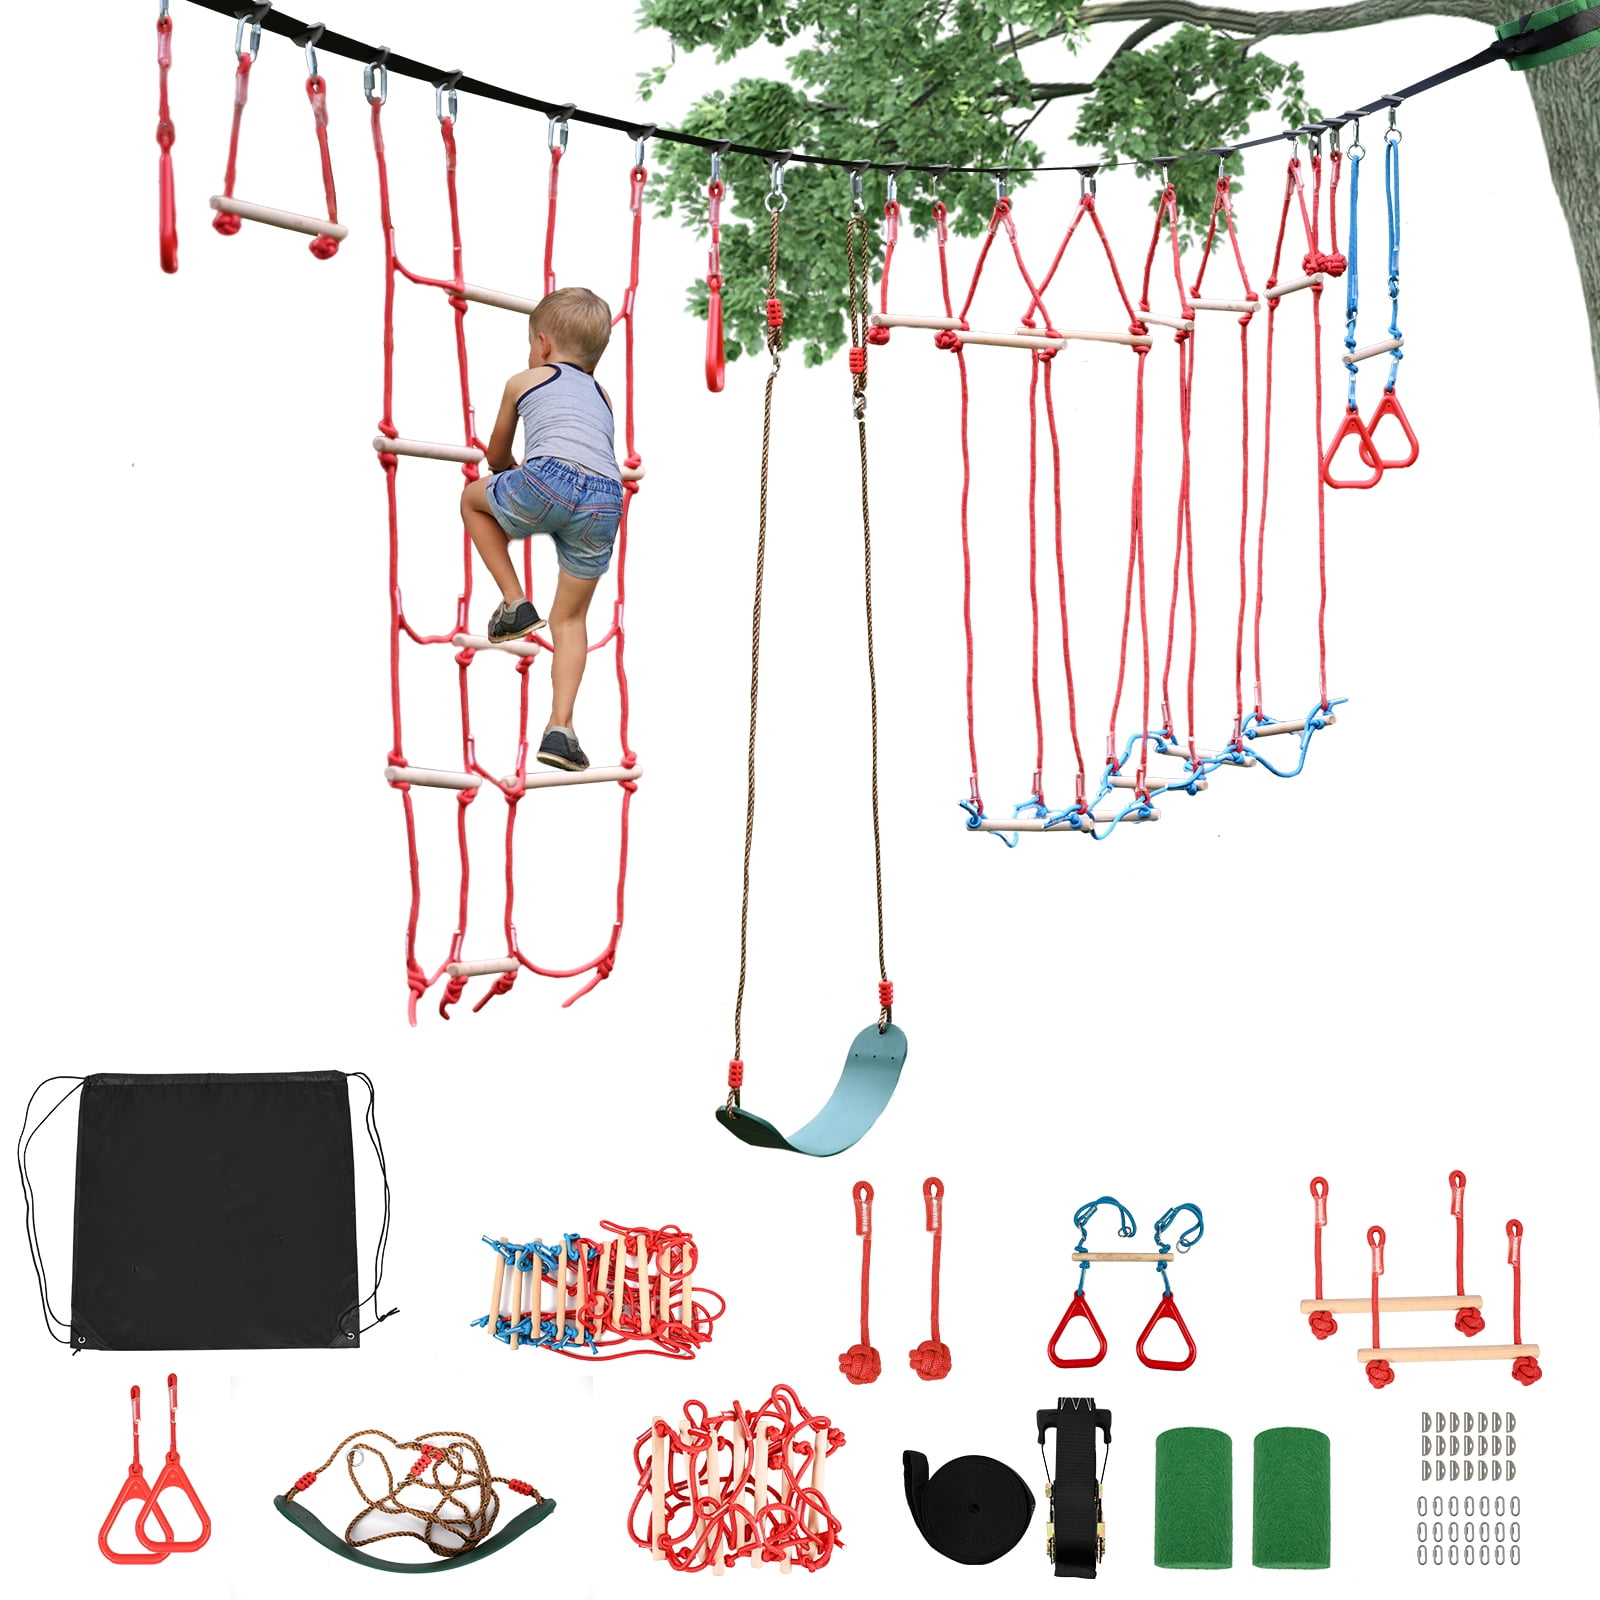 flybold Backyard Slackline Kit - 57 ft Balance Rope and Training Line with  Tree Protectors, Arm Trainer, Ratchet Cover and Carry Bag - For Kids and